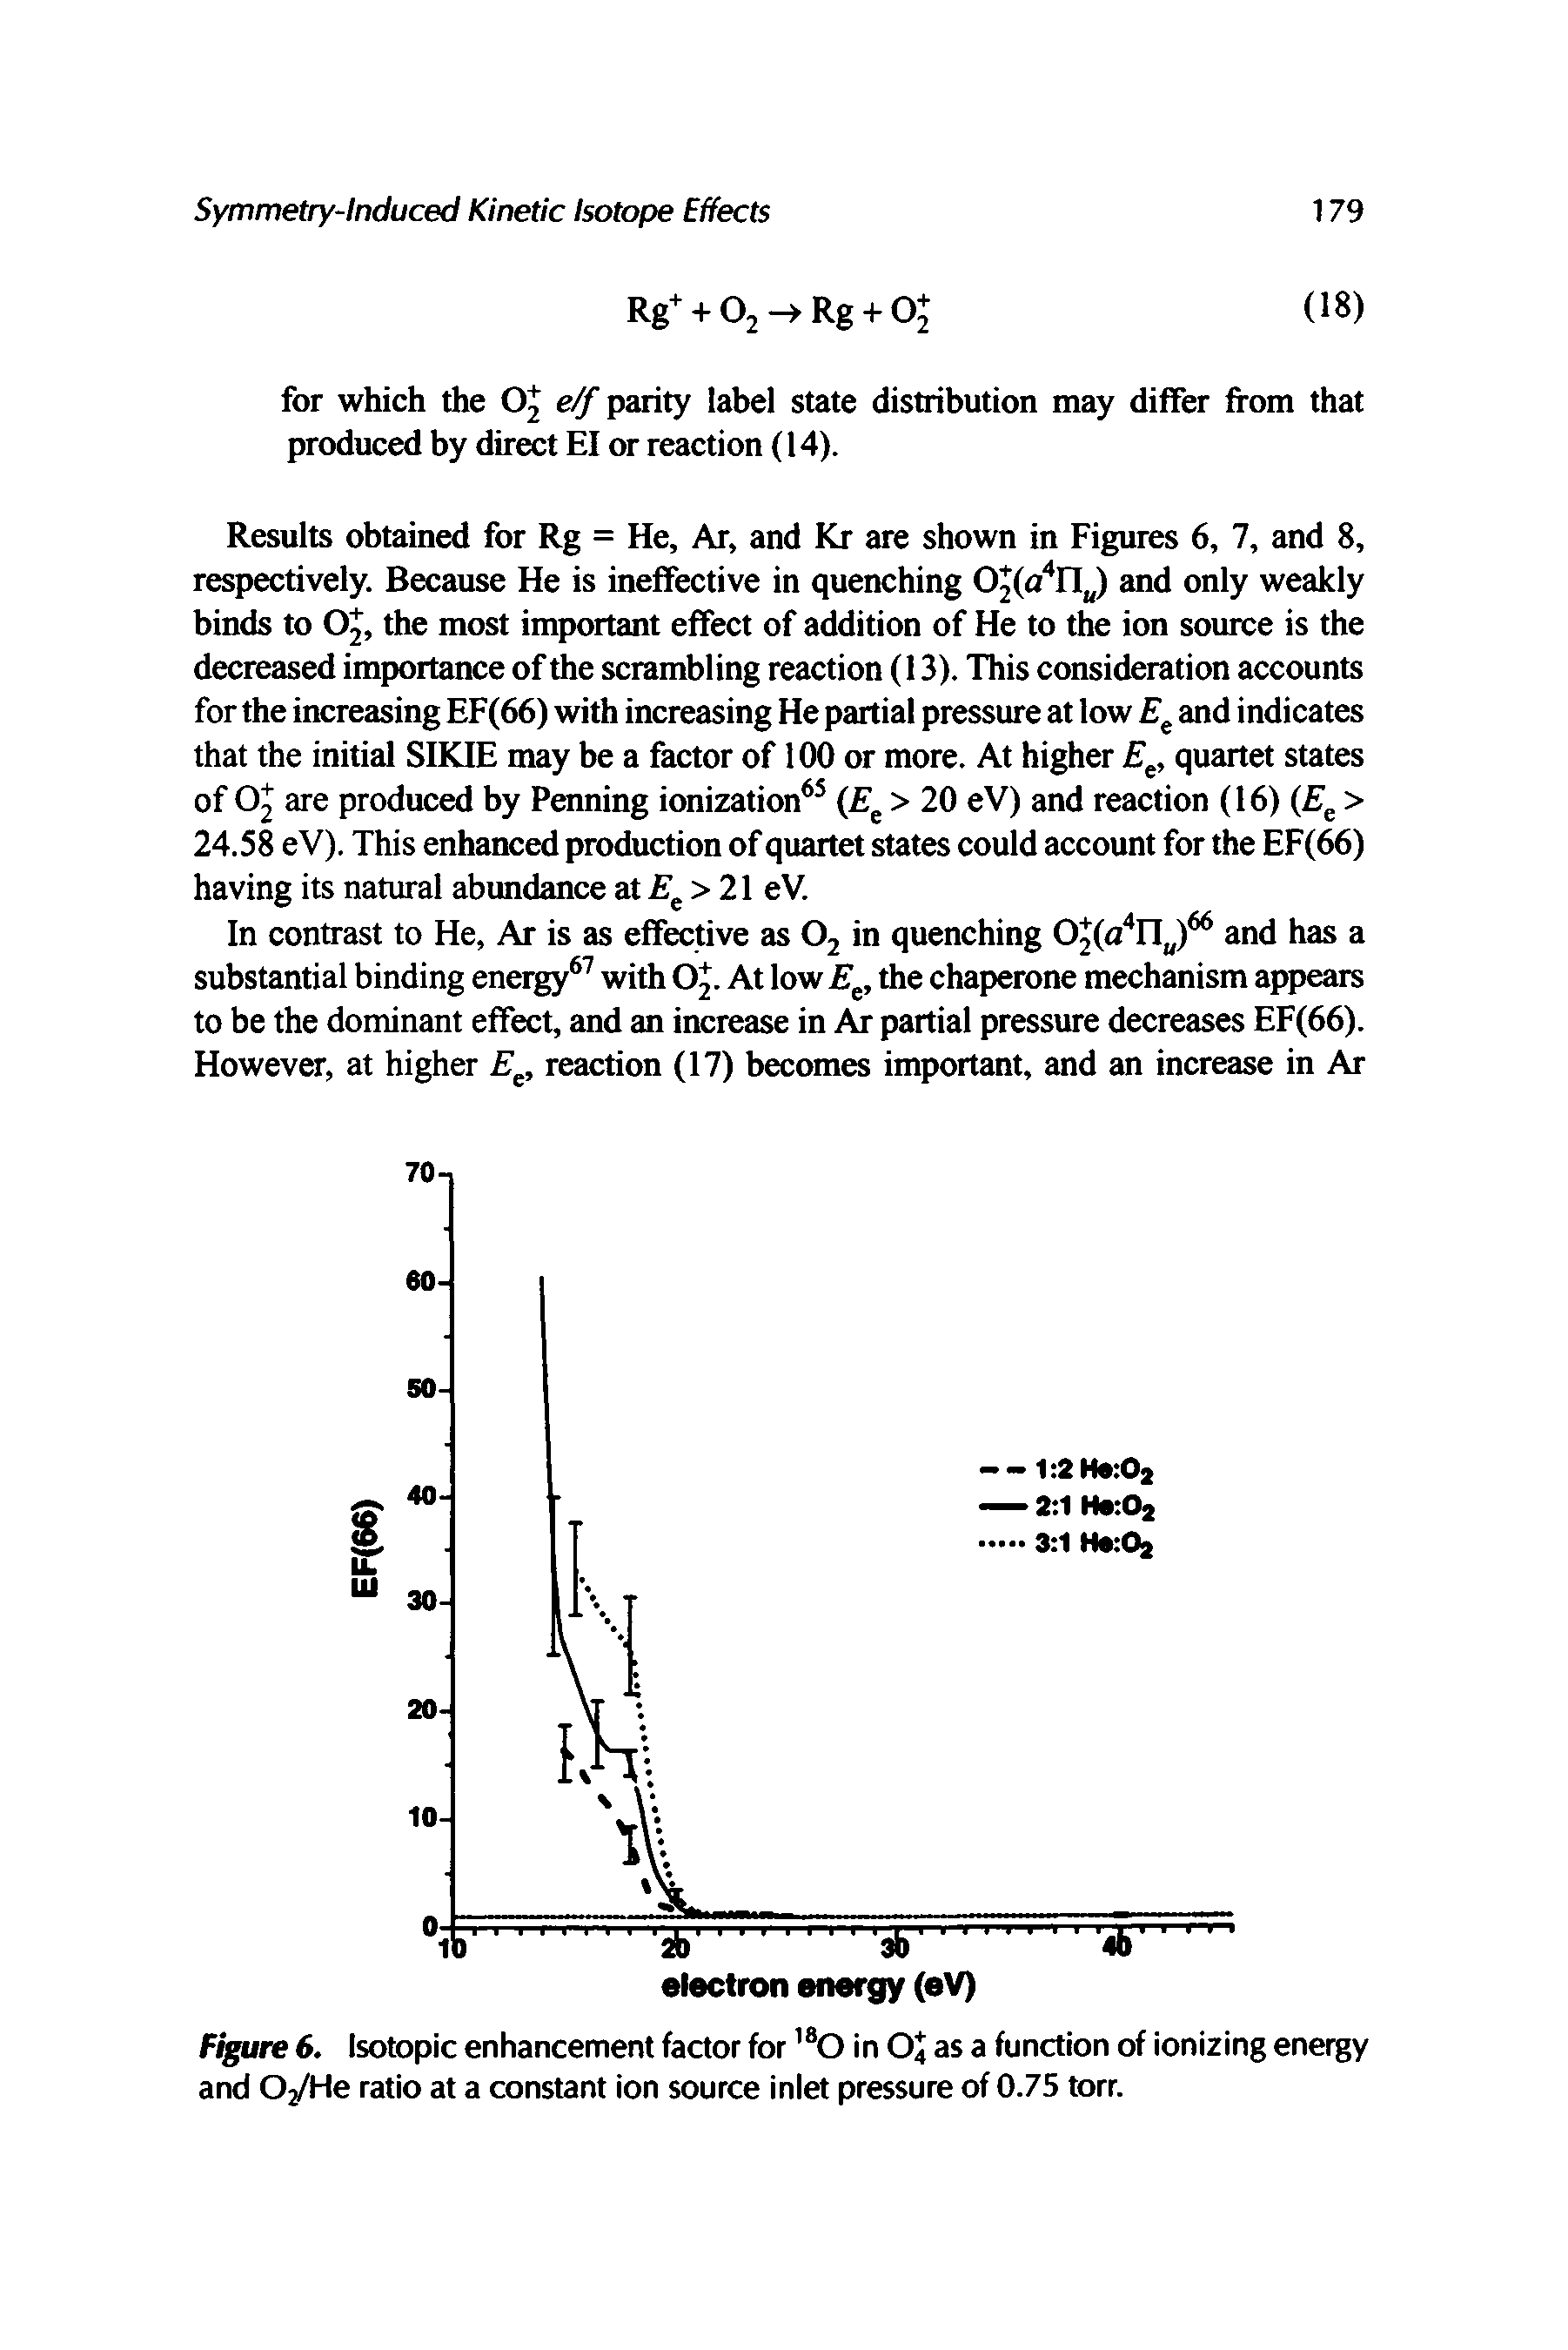 Figure 6. Isotopic enhancement factor for 0 in OJ as a function of ionizing energy and 02/He ratio at a constant ion source inlet pressure of 0.75 torr.